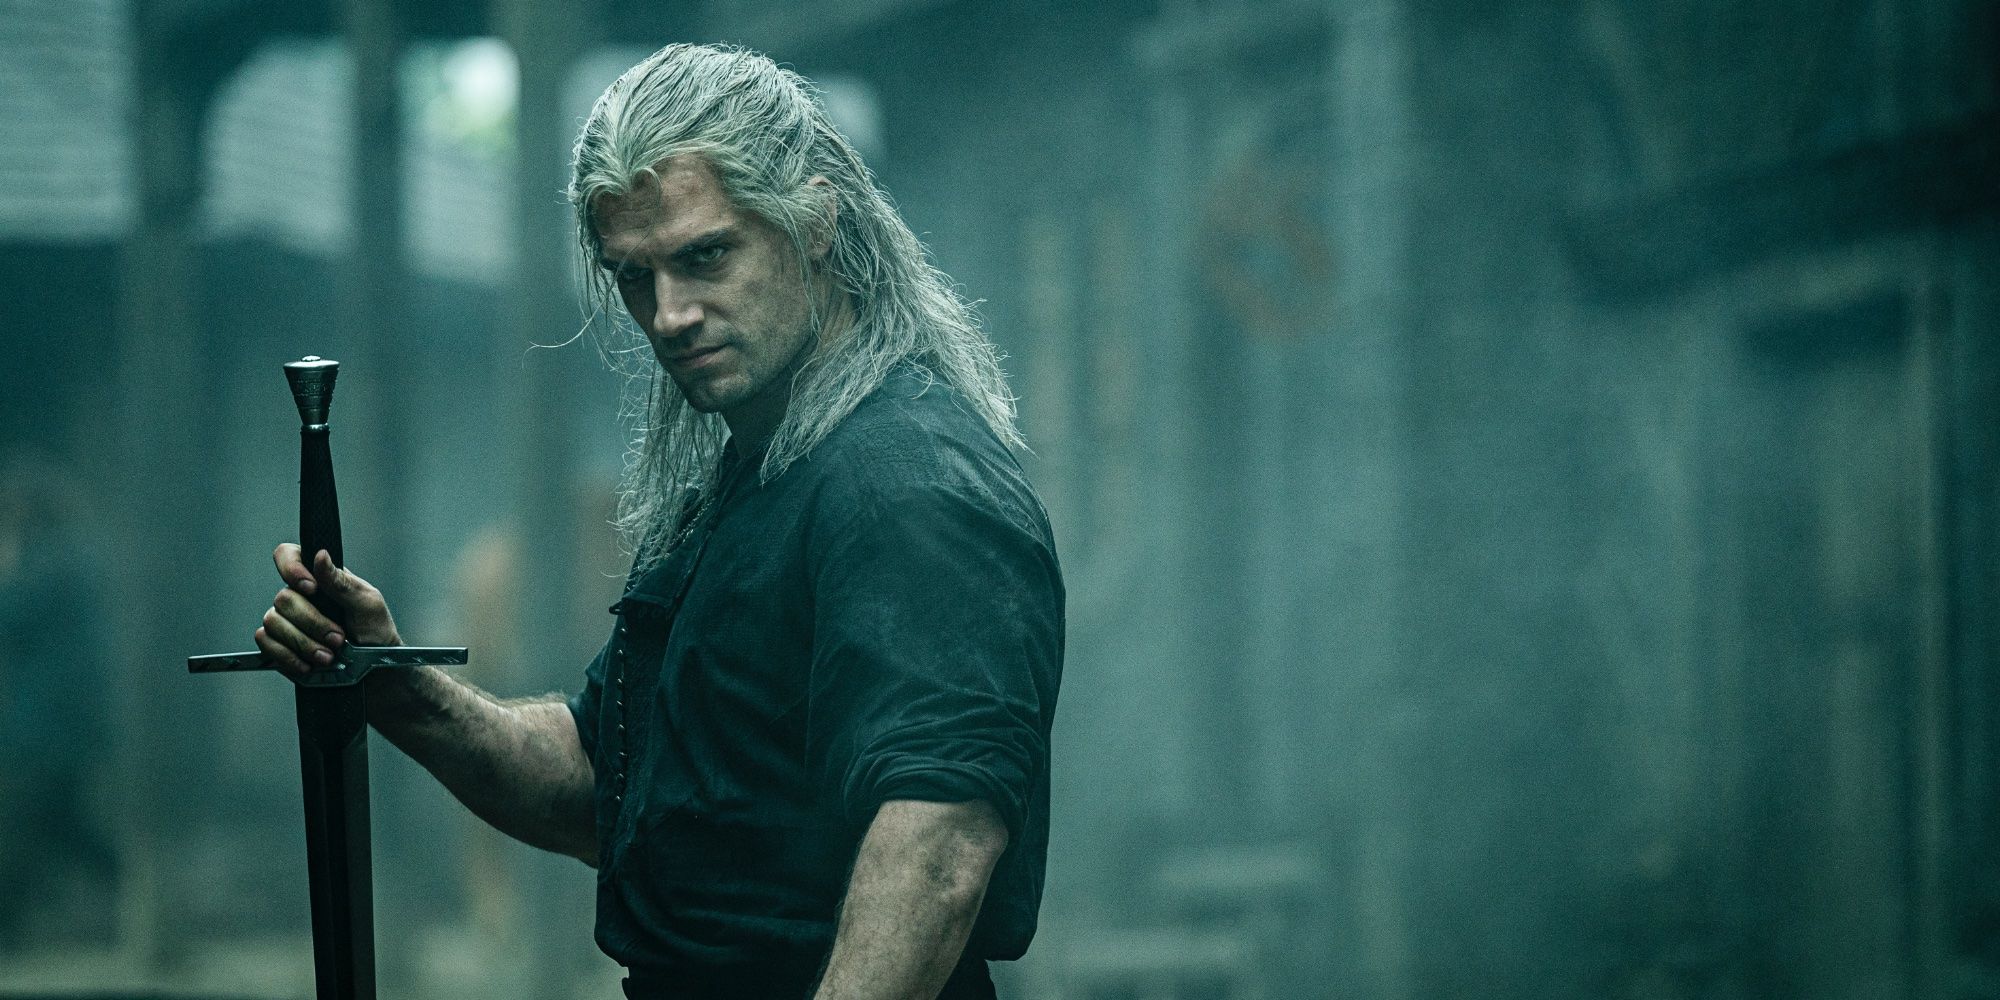 Henry Cavill in The Witcher Season 1